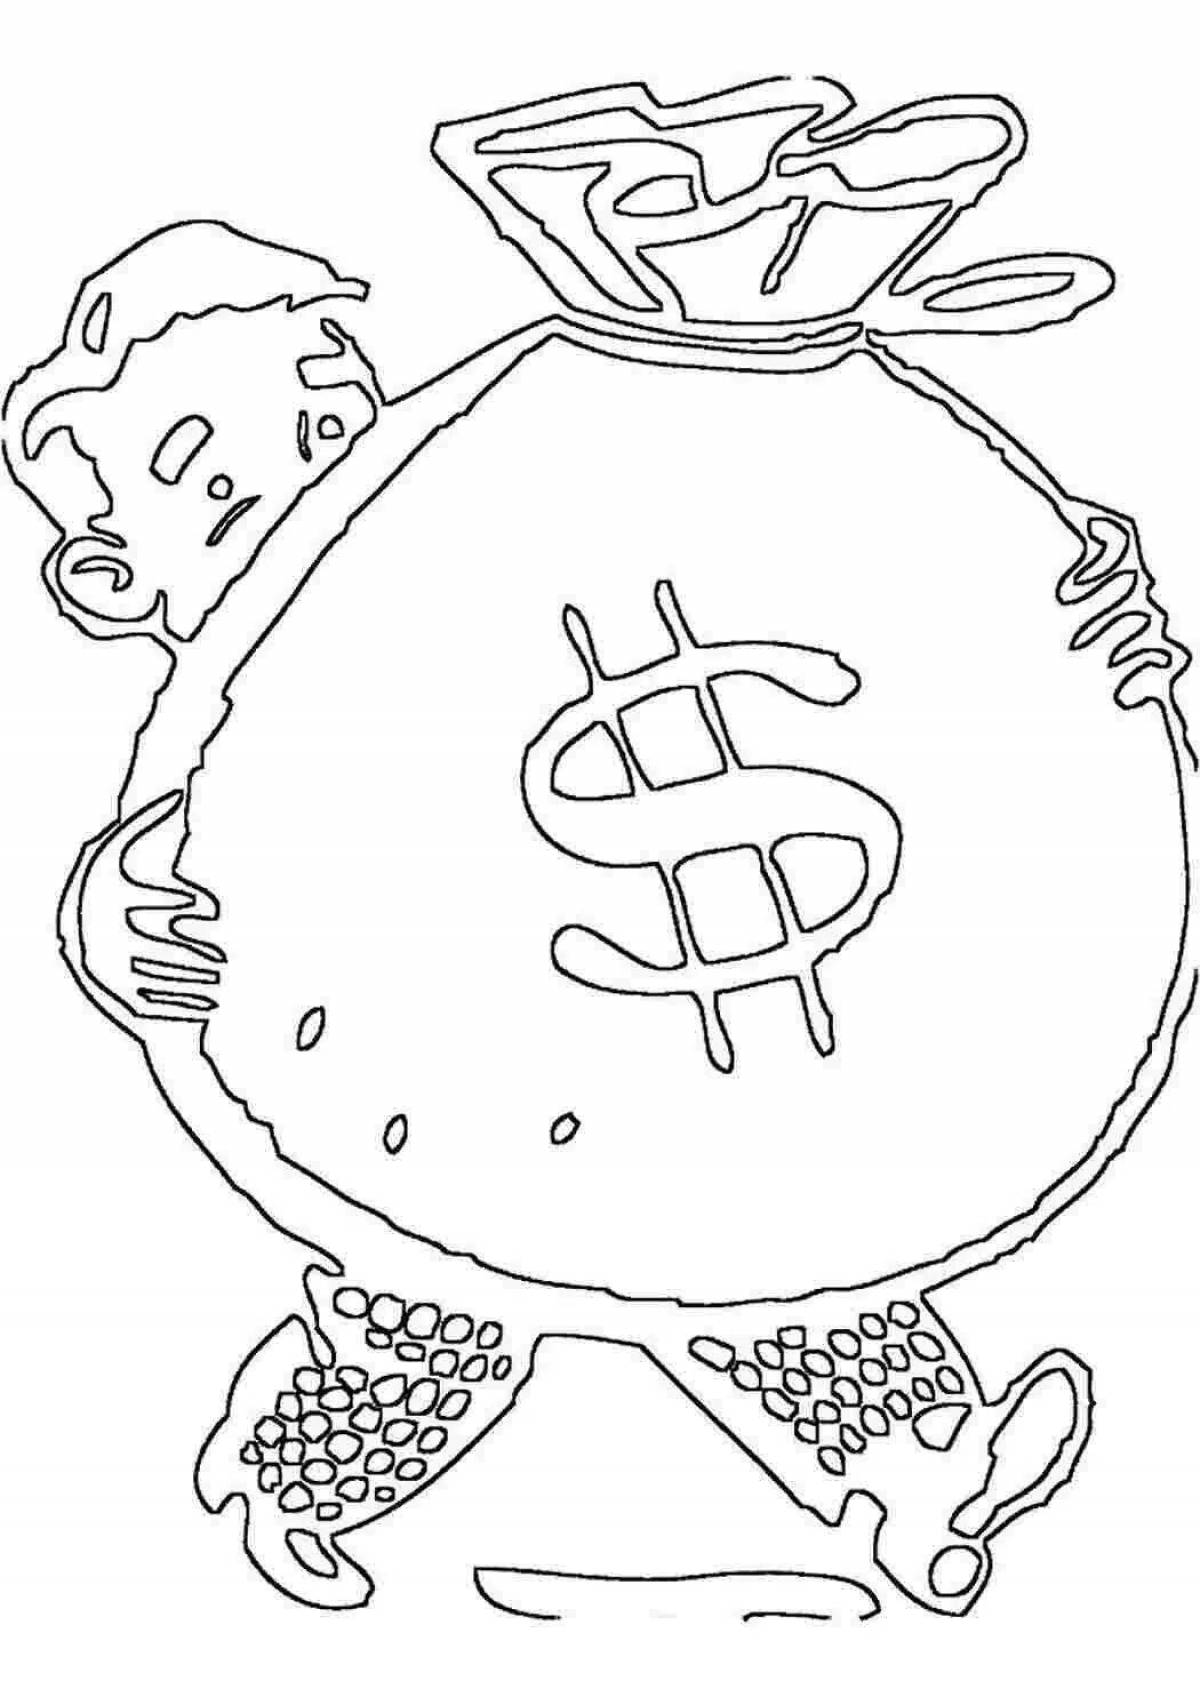 Vibrant financial literacy coloring book for younger students